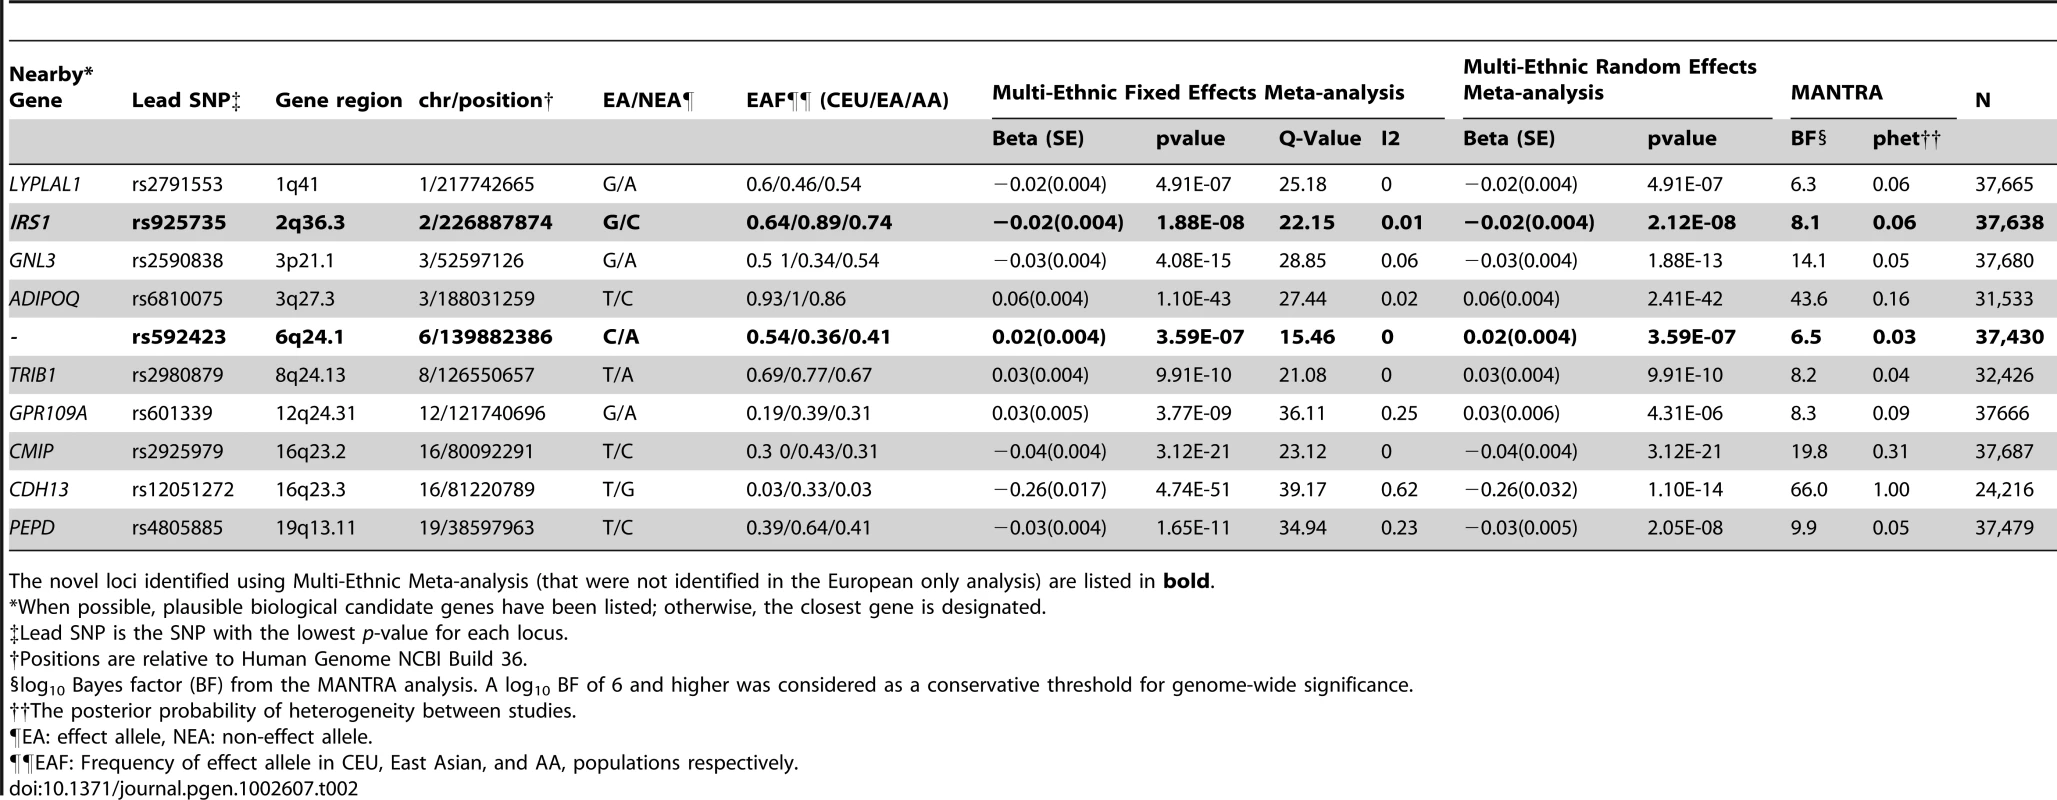 Genome-Wide Significant SNPs from the Sex-Combined Multi-Ethnic Meta-Analysis.